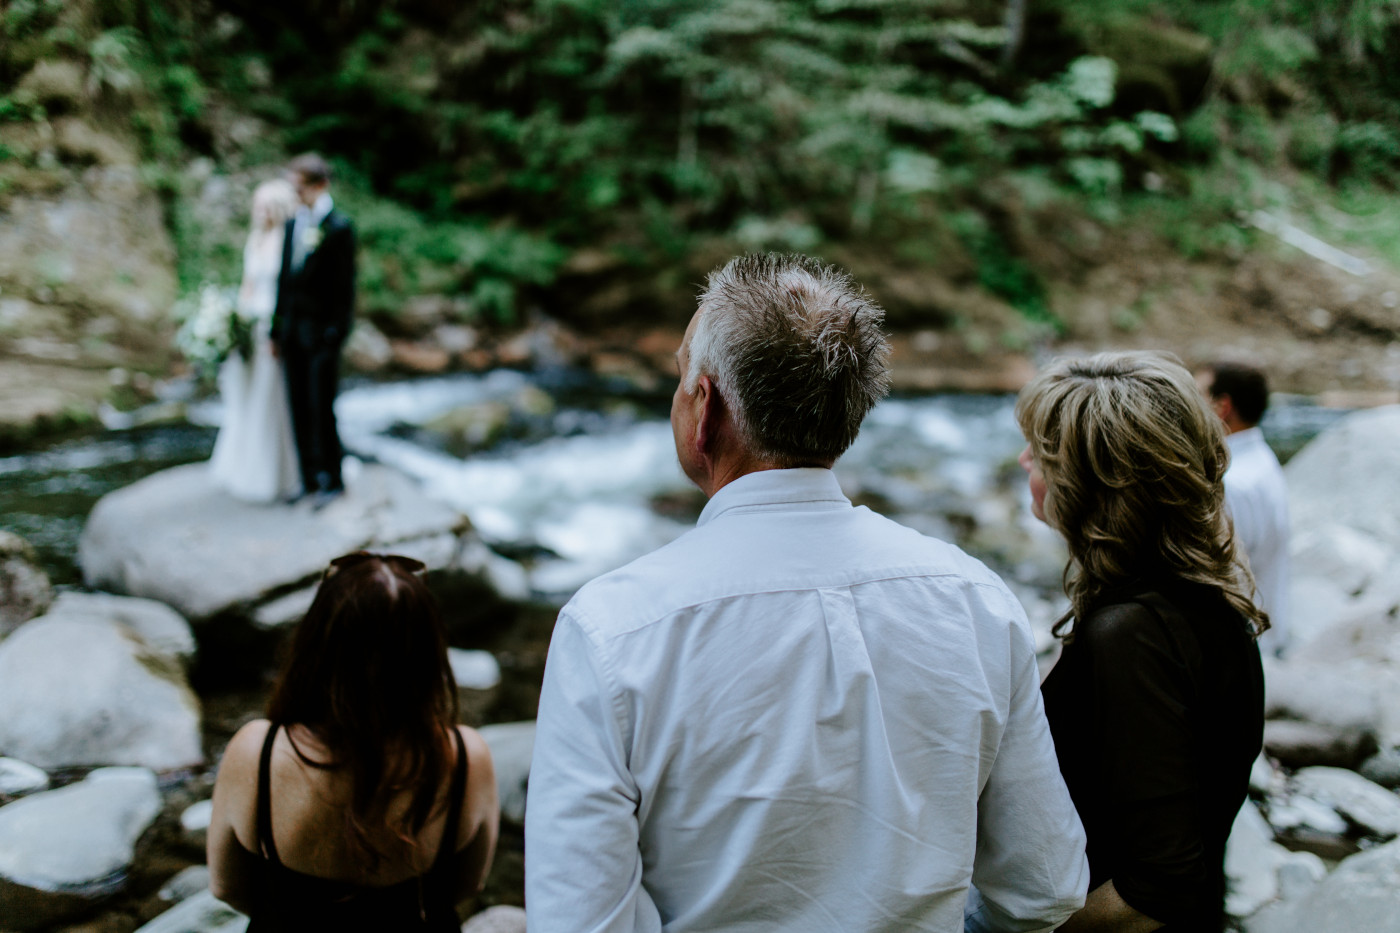 The parents look on at the elopement ceremony.